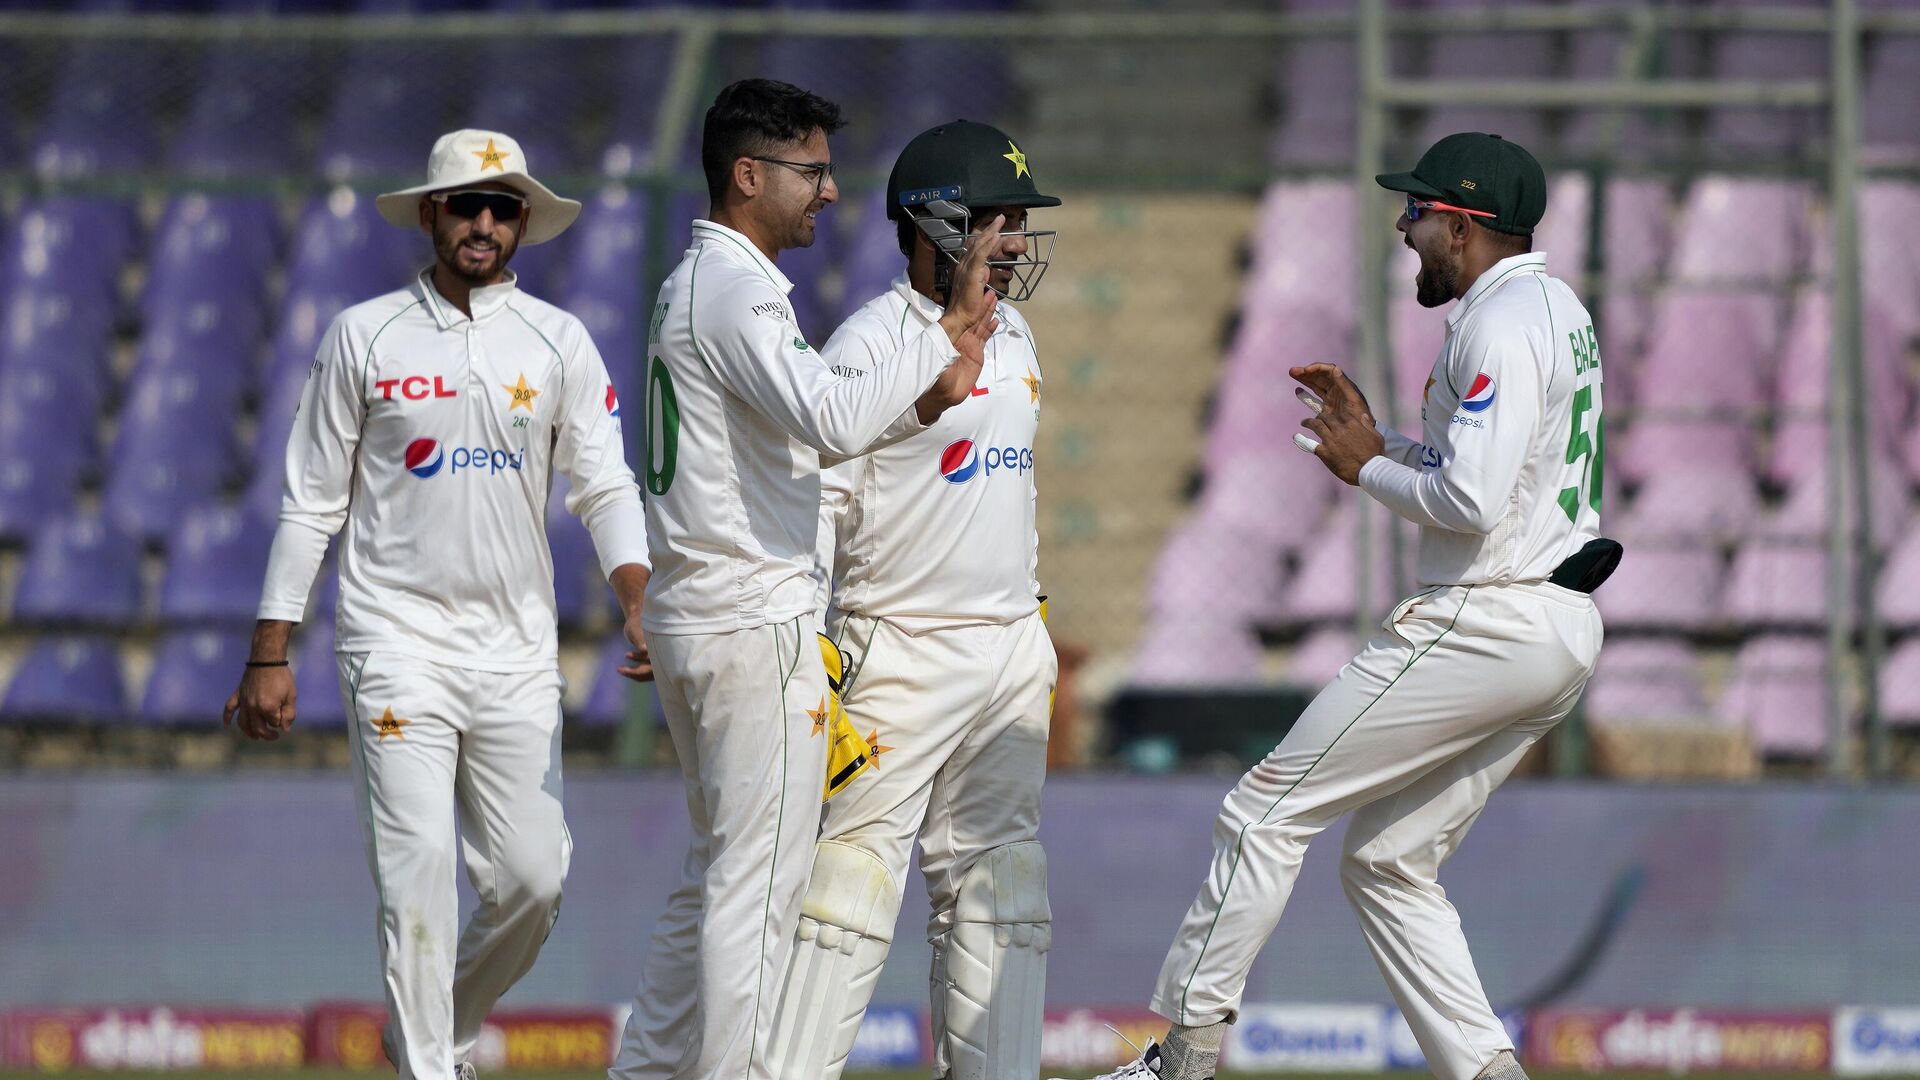 Pakistan's Abrar Ahmed, left, celebrates with teammates after dismissal of New Zealand's Daryl Mitchell during the third day of first test cricket match between Pakistan and New Zealand, in Karachi, Pakistan, Wednesday, Dec. 28, 2022. - Sputnik India, 1920, 28.12.2022